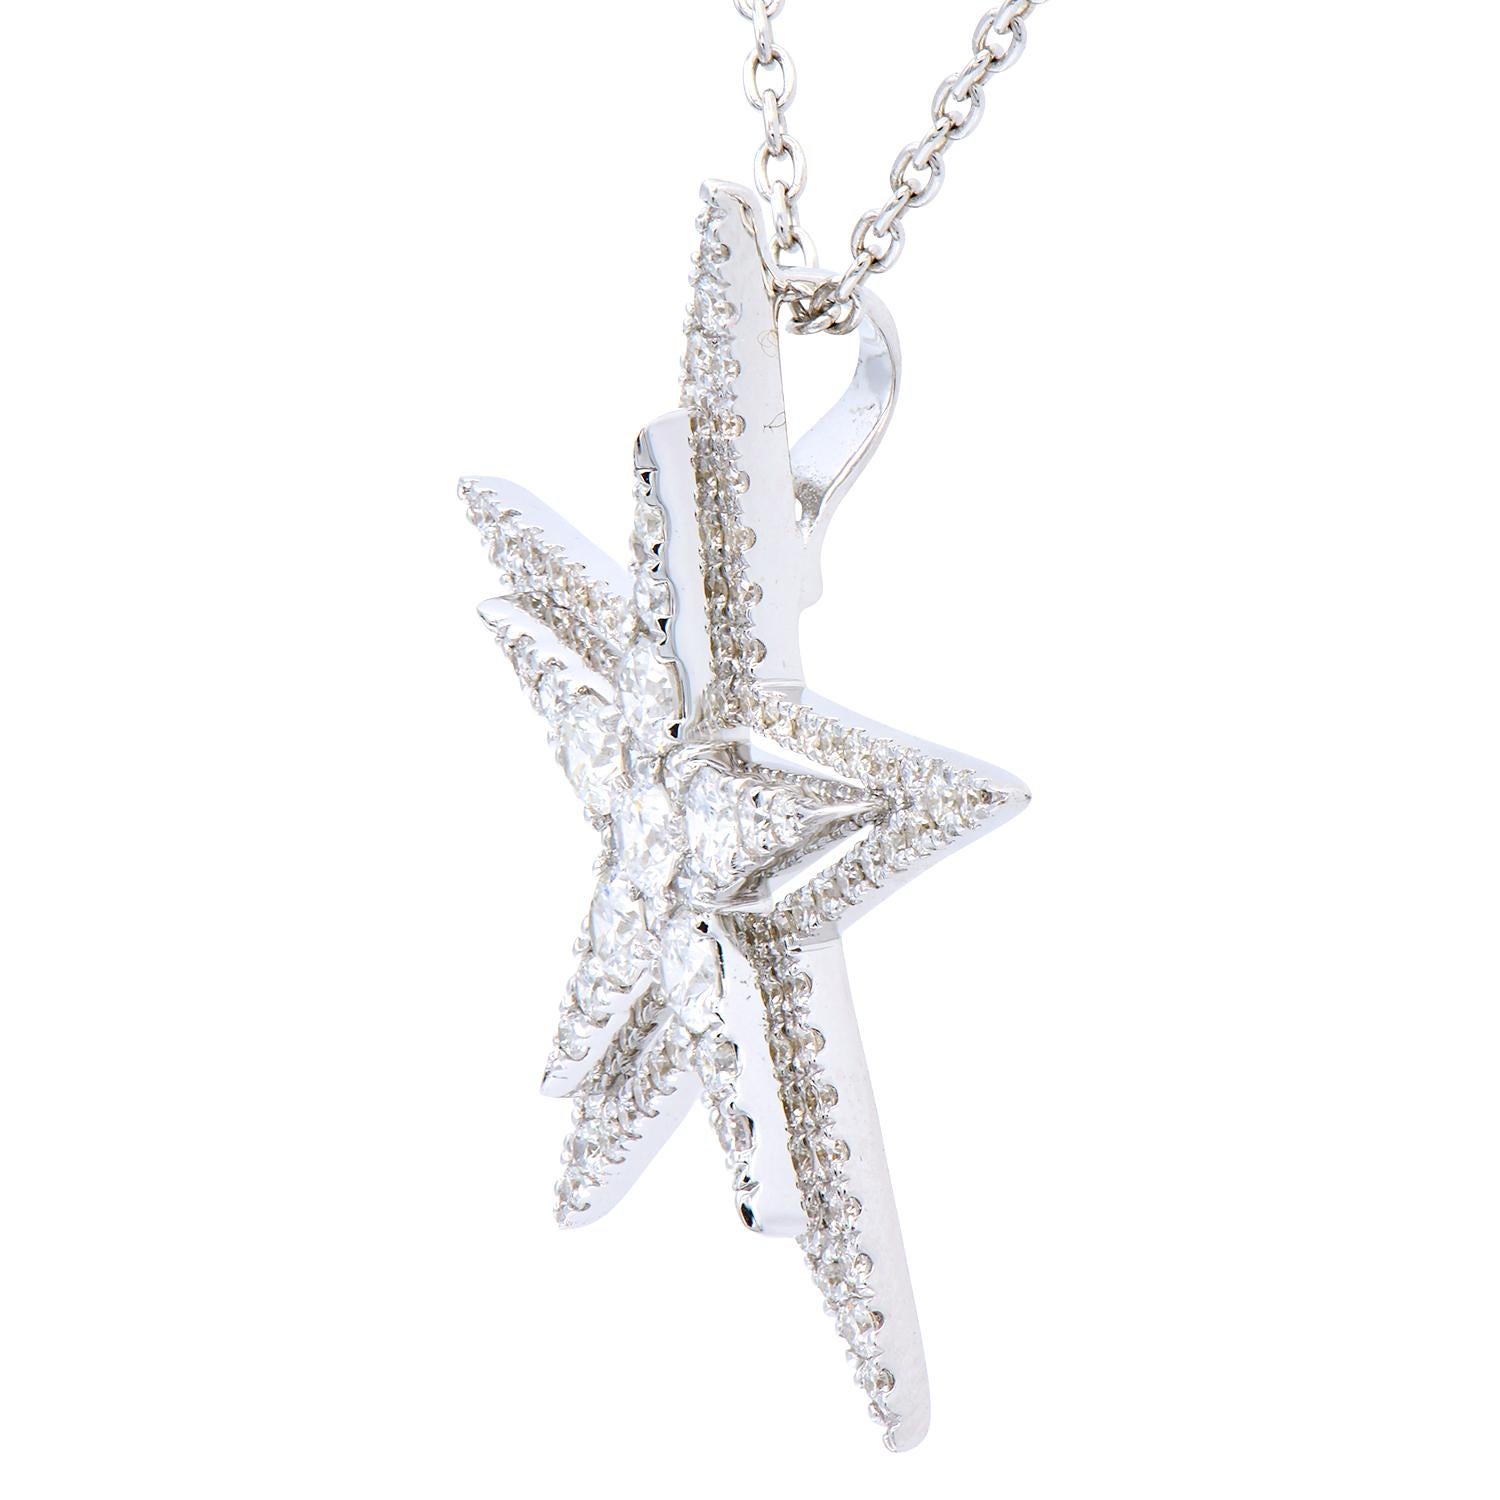 This star pendant shines bright with 96 round VS2, G color diamonds that total 0.87 carats. They are set in 2.5 grams of 18 karat white gold. This stunning 5 points star comes with an 18 karat white gold chain that can be worn at 3 different lengths